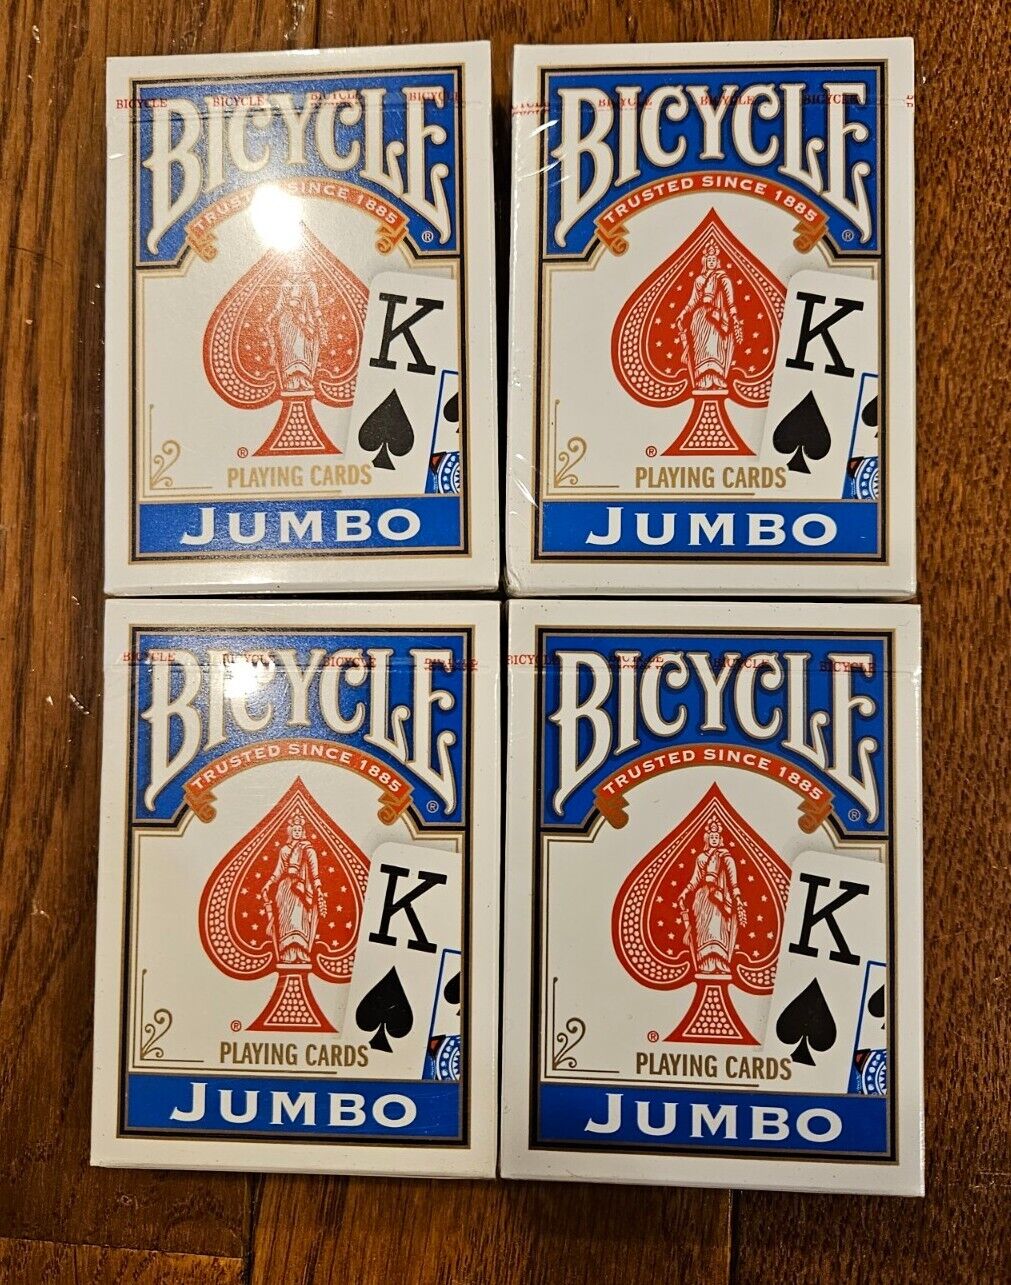 NEW (Lots Of 4) 2009 Bicycle Poker Jumbo Index Playing Card Sealed Super Quality